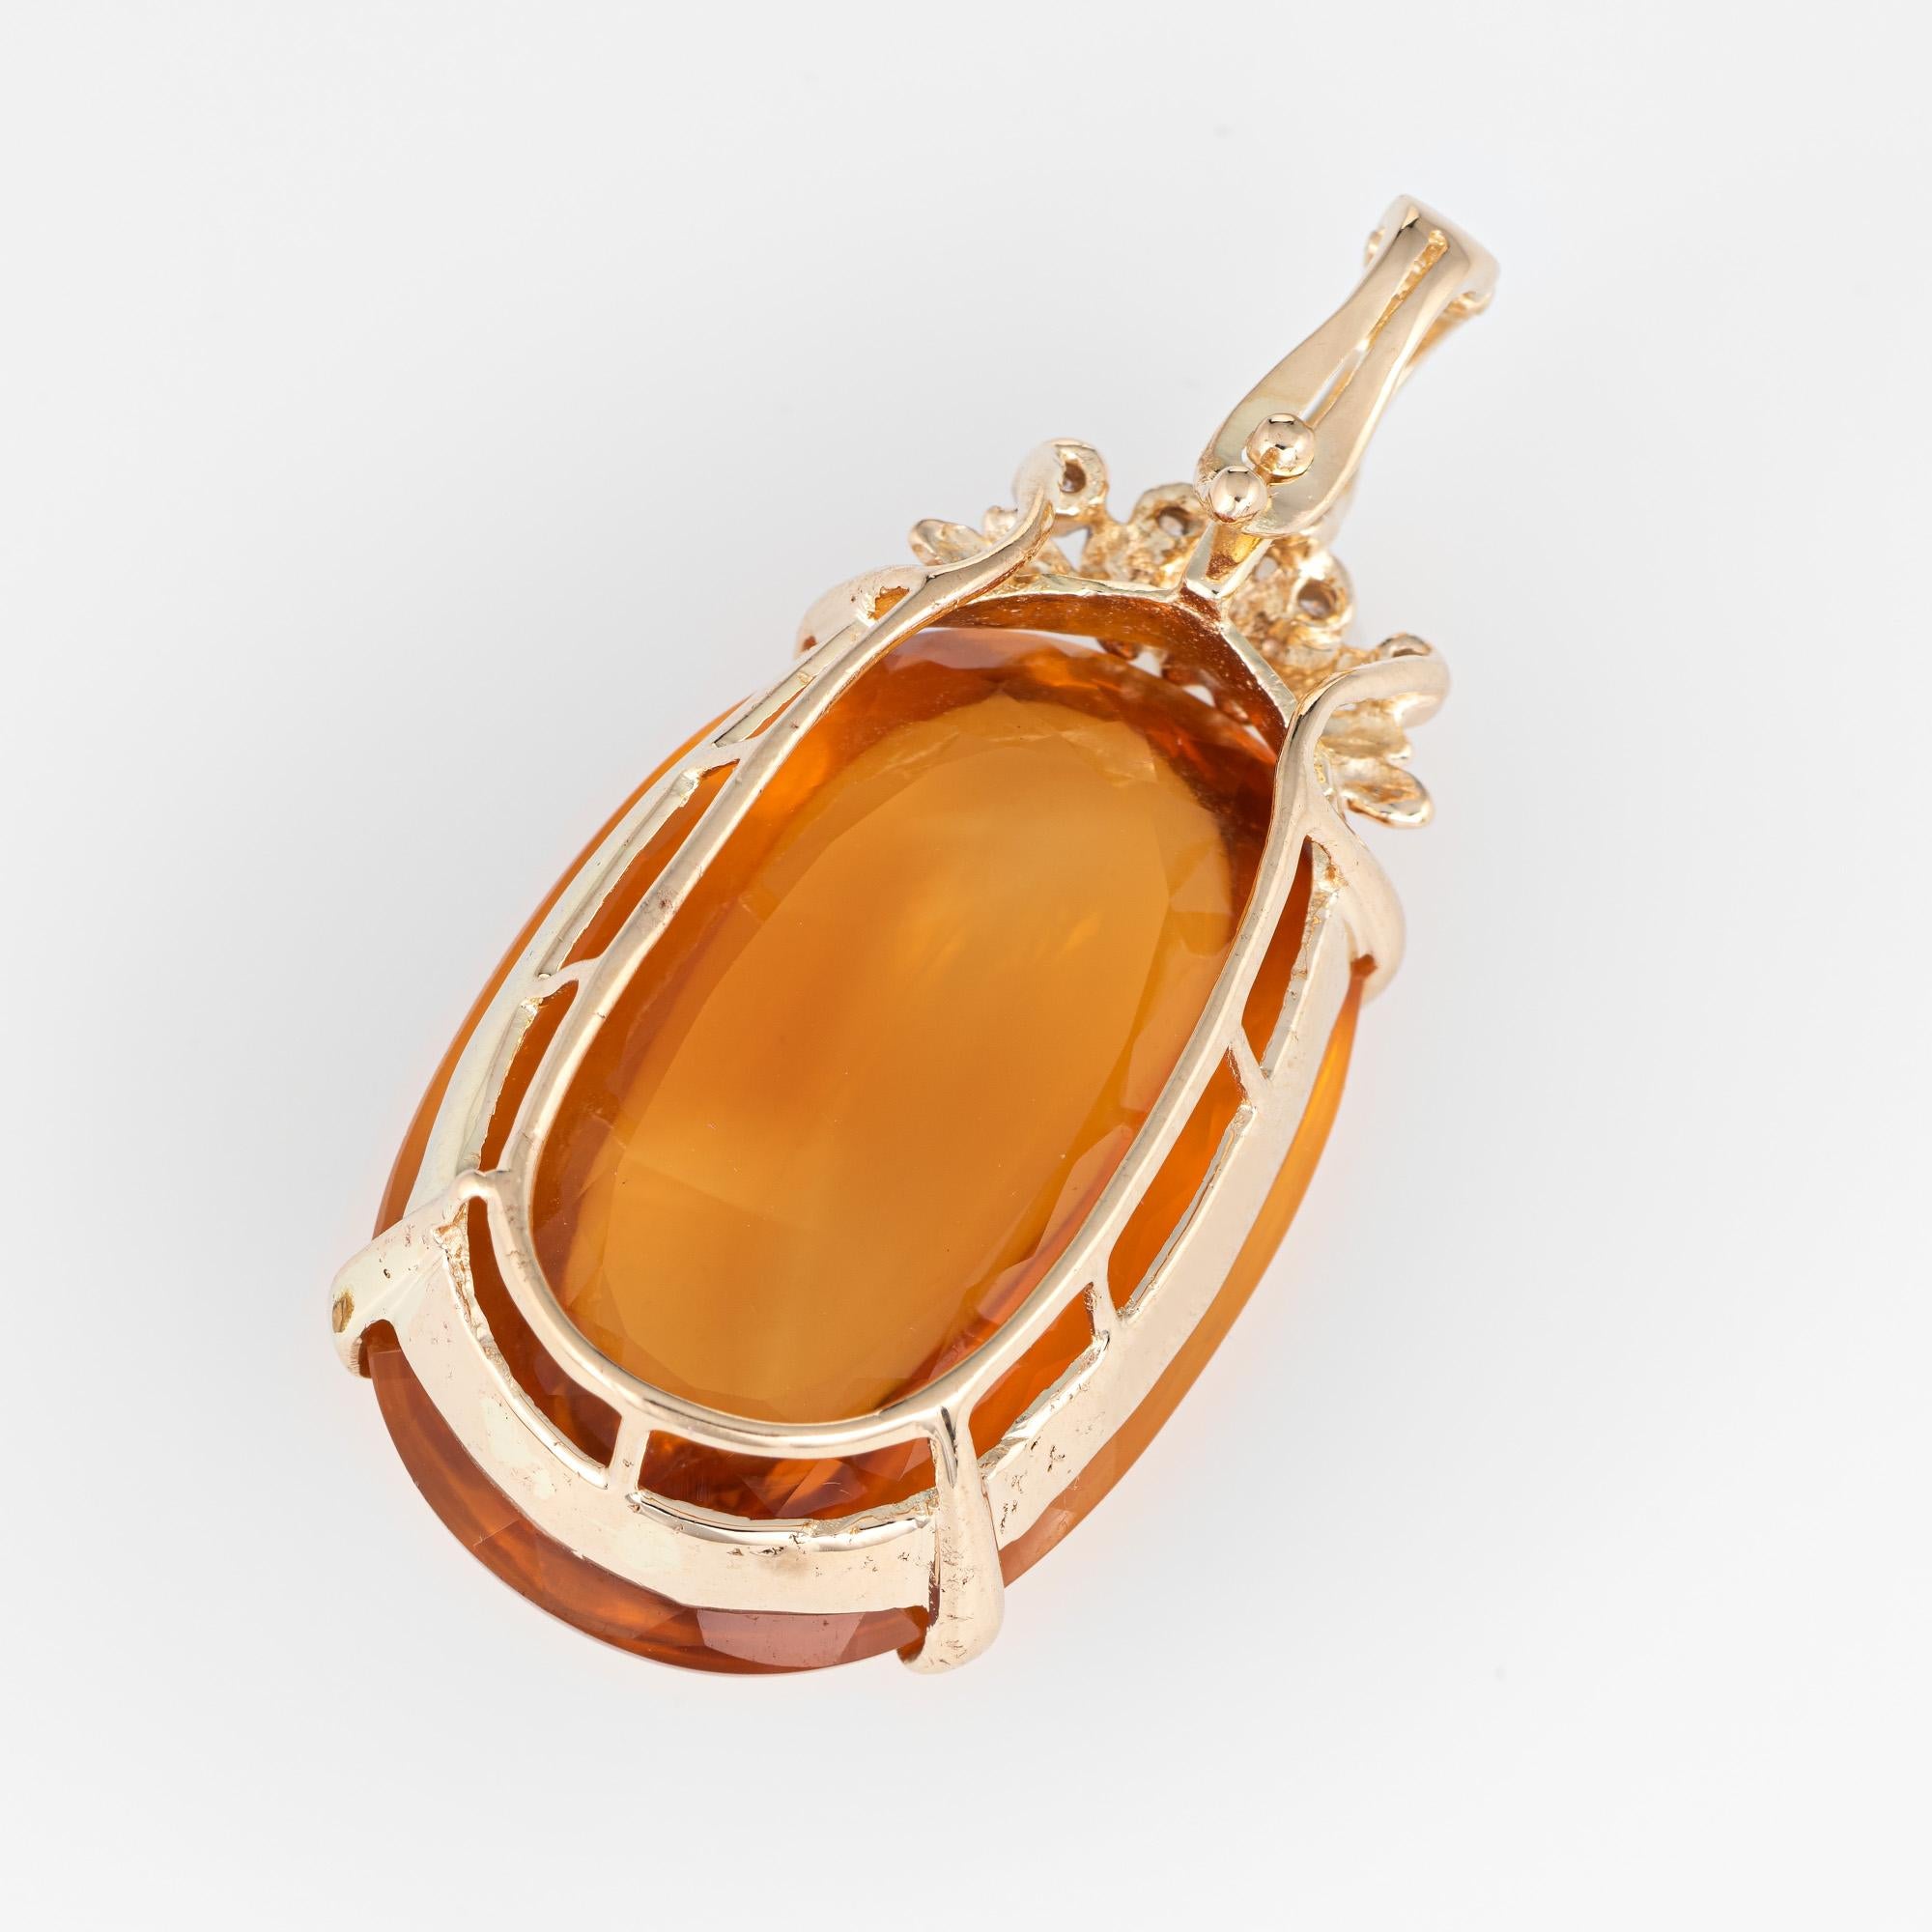 Finely detailed large vintage Madeira citrine & diamond pendant (circa 1960s to 1970s) crafted in 14k yellow gold.   

The citrine measures 28mm x 18mm (estimated at 40 carats). The citrine is in excellent condition and free of cracks or chips. The